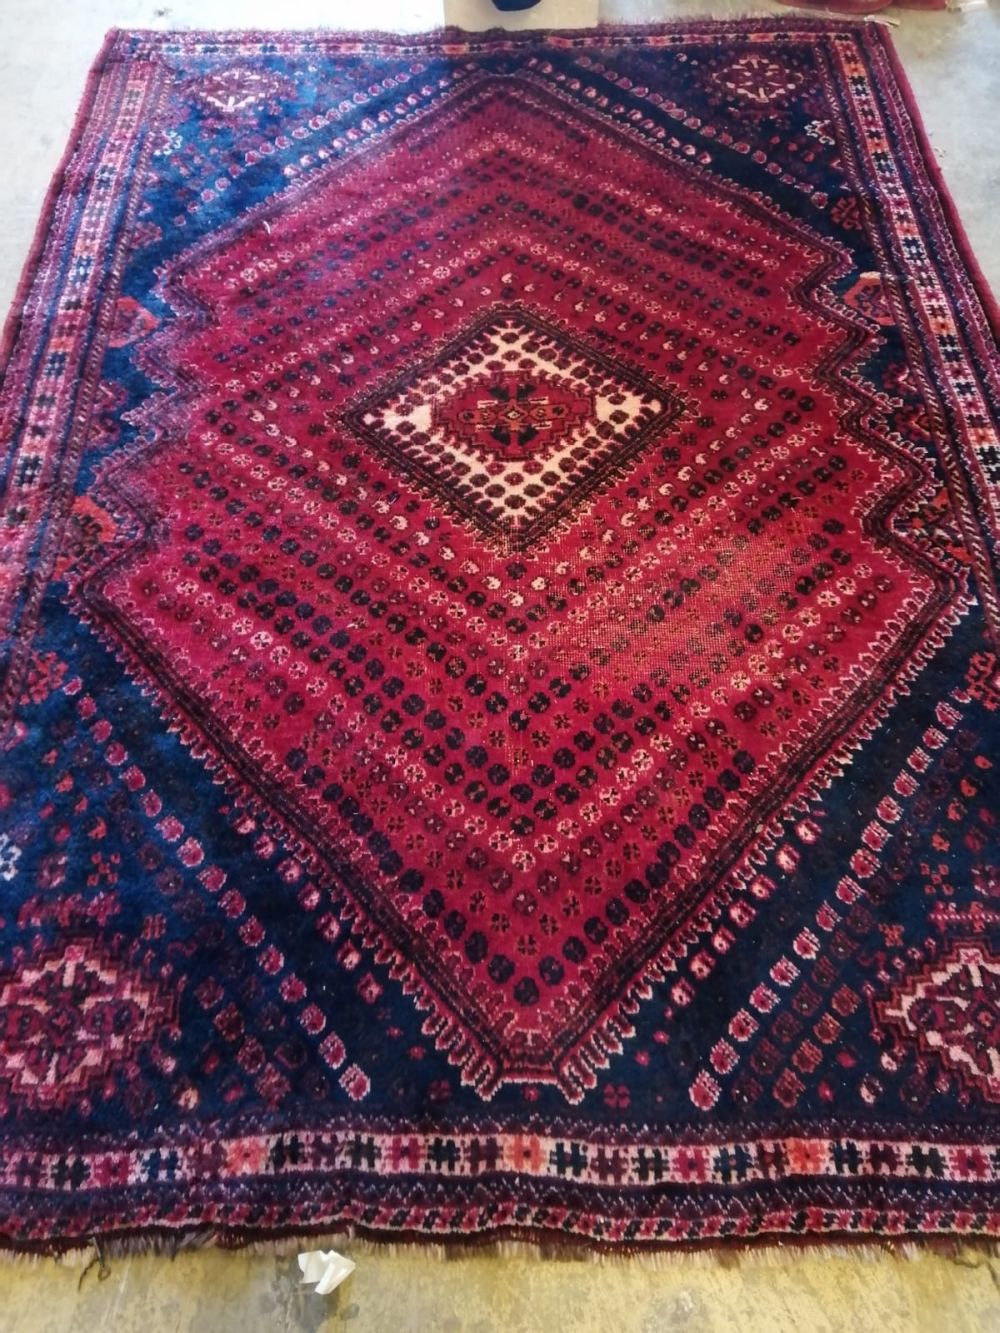 A North West Persian red ground rug, 250 x 180cm